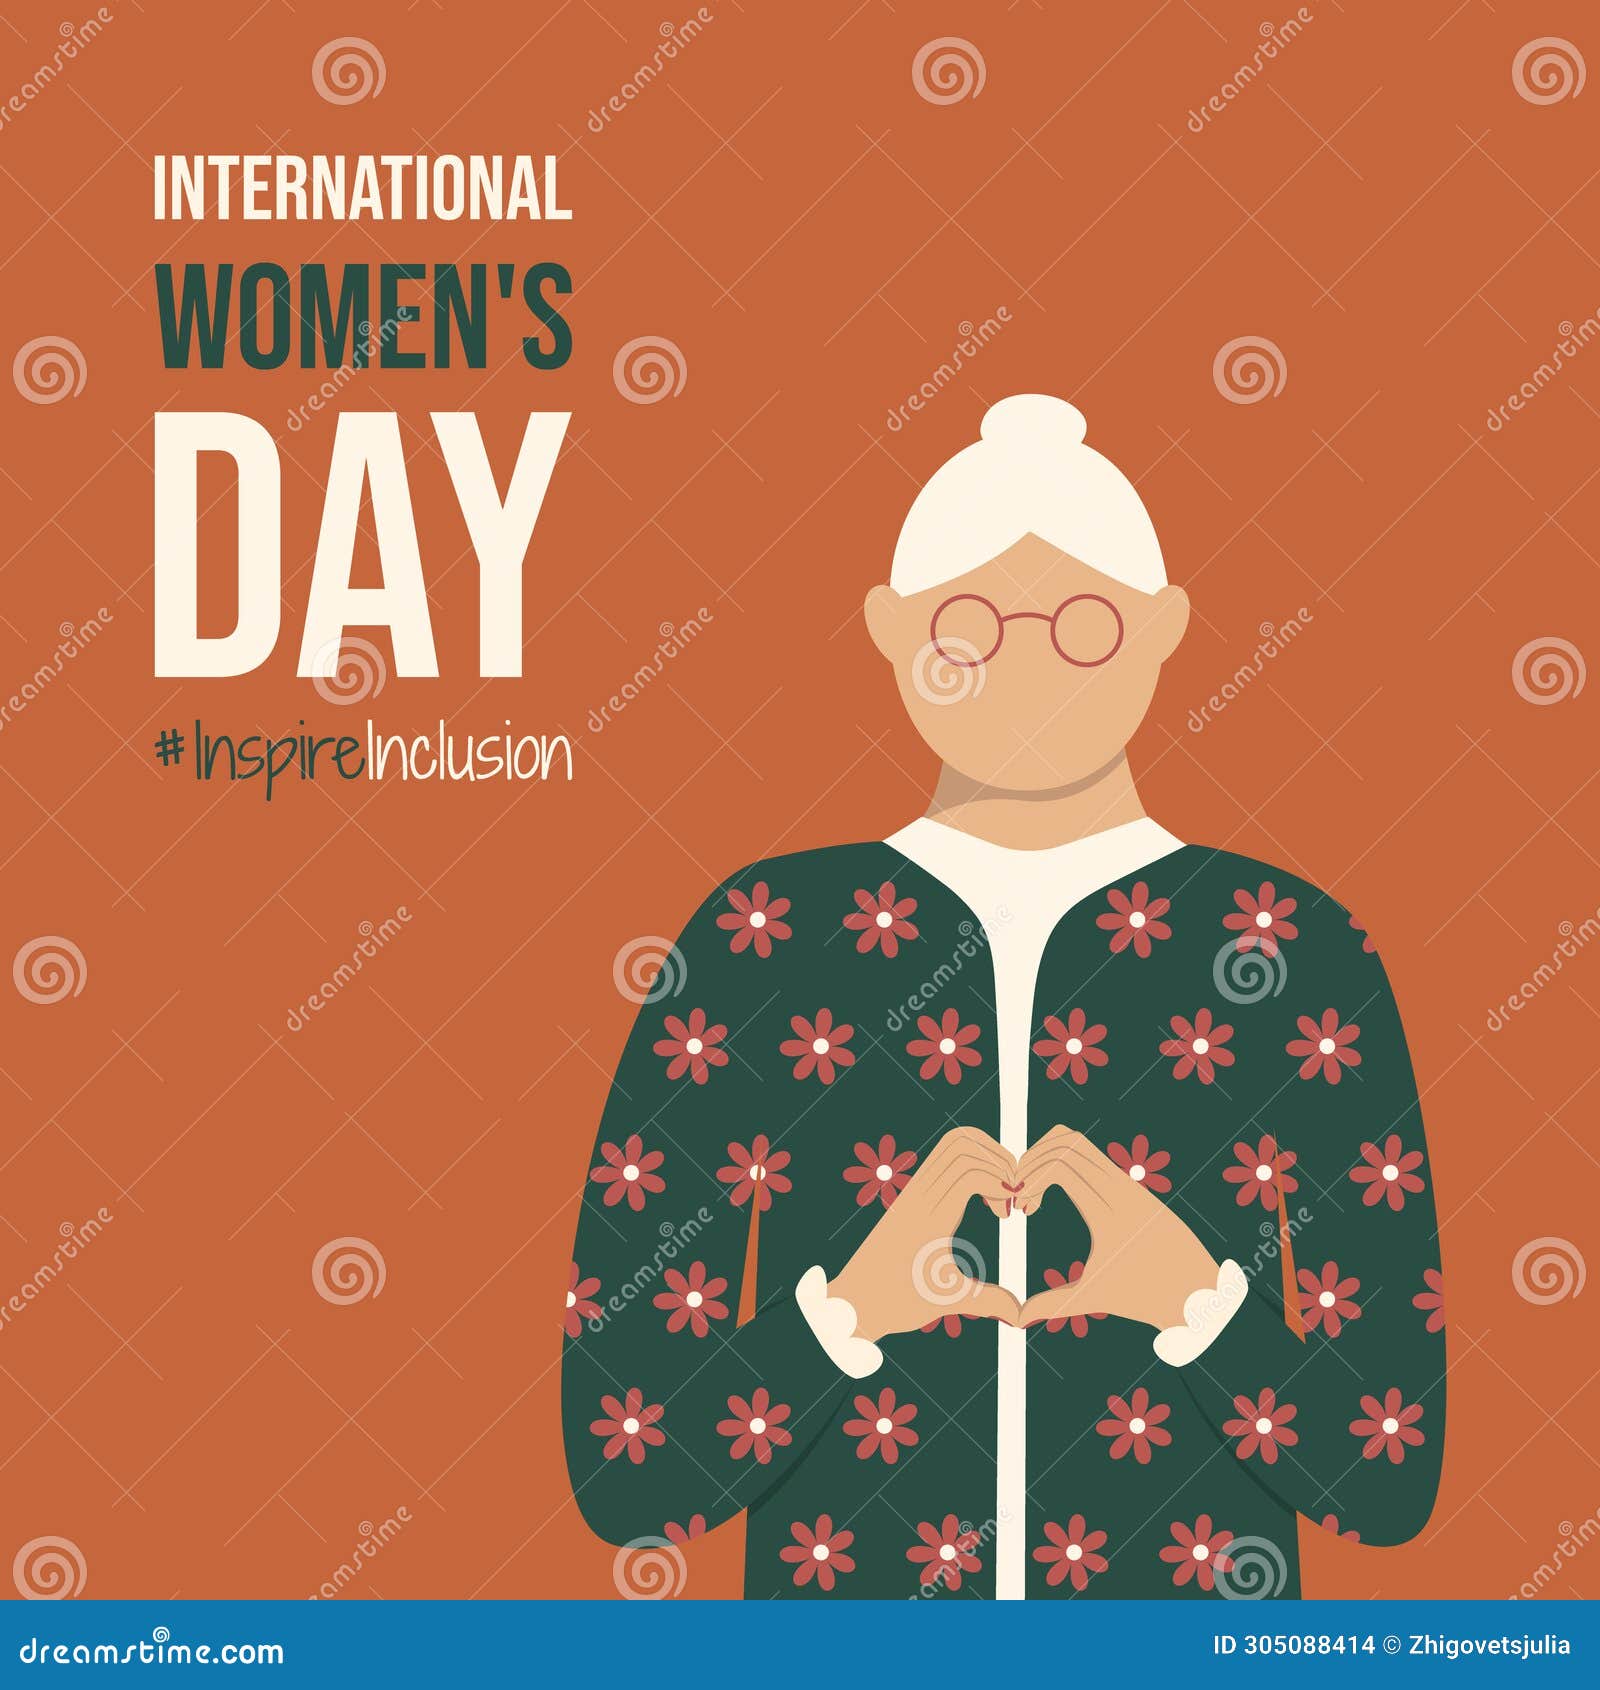 old lady on international women's day 2024 postcard. woman shows heart  with hands on spring iwd inspireinclusion